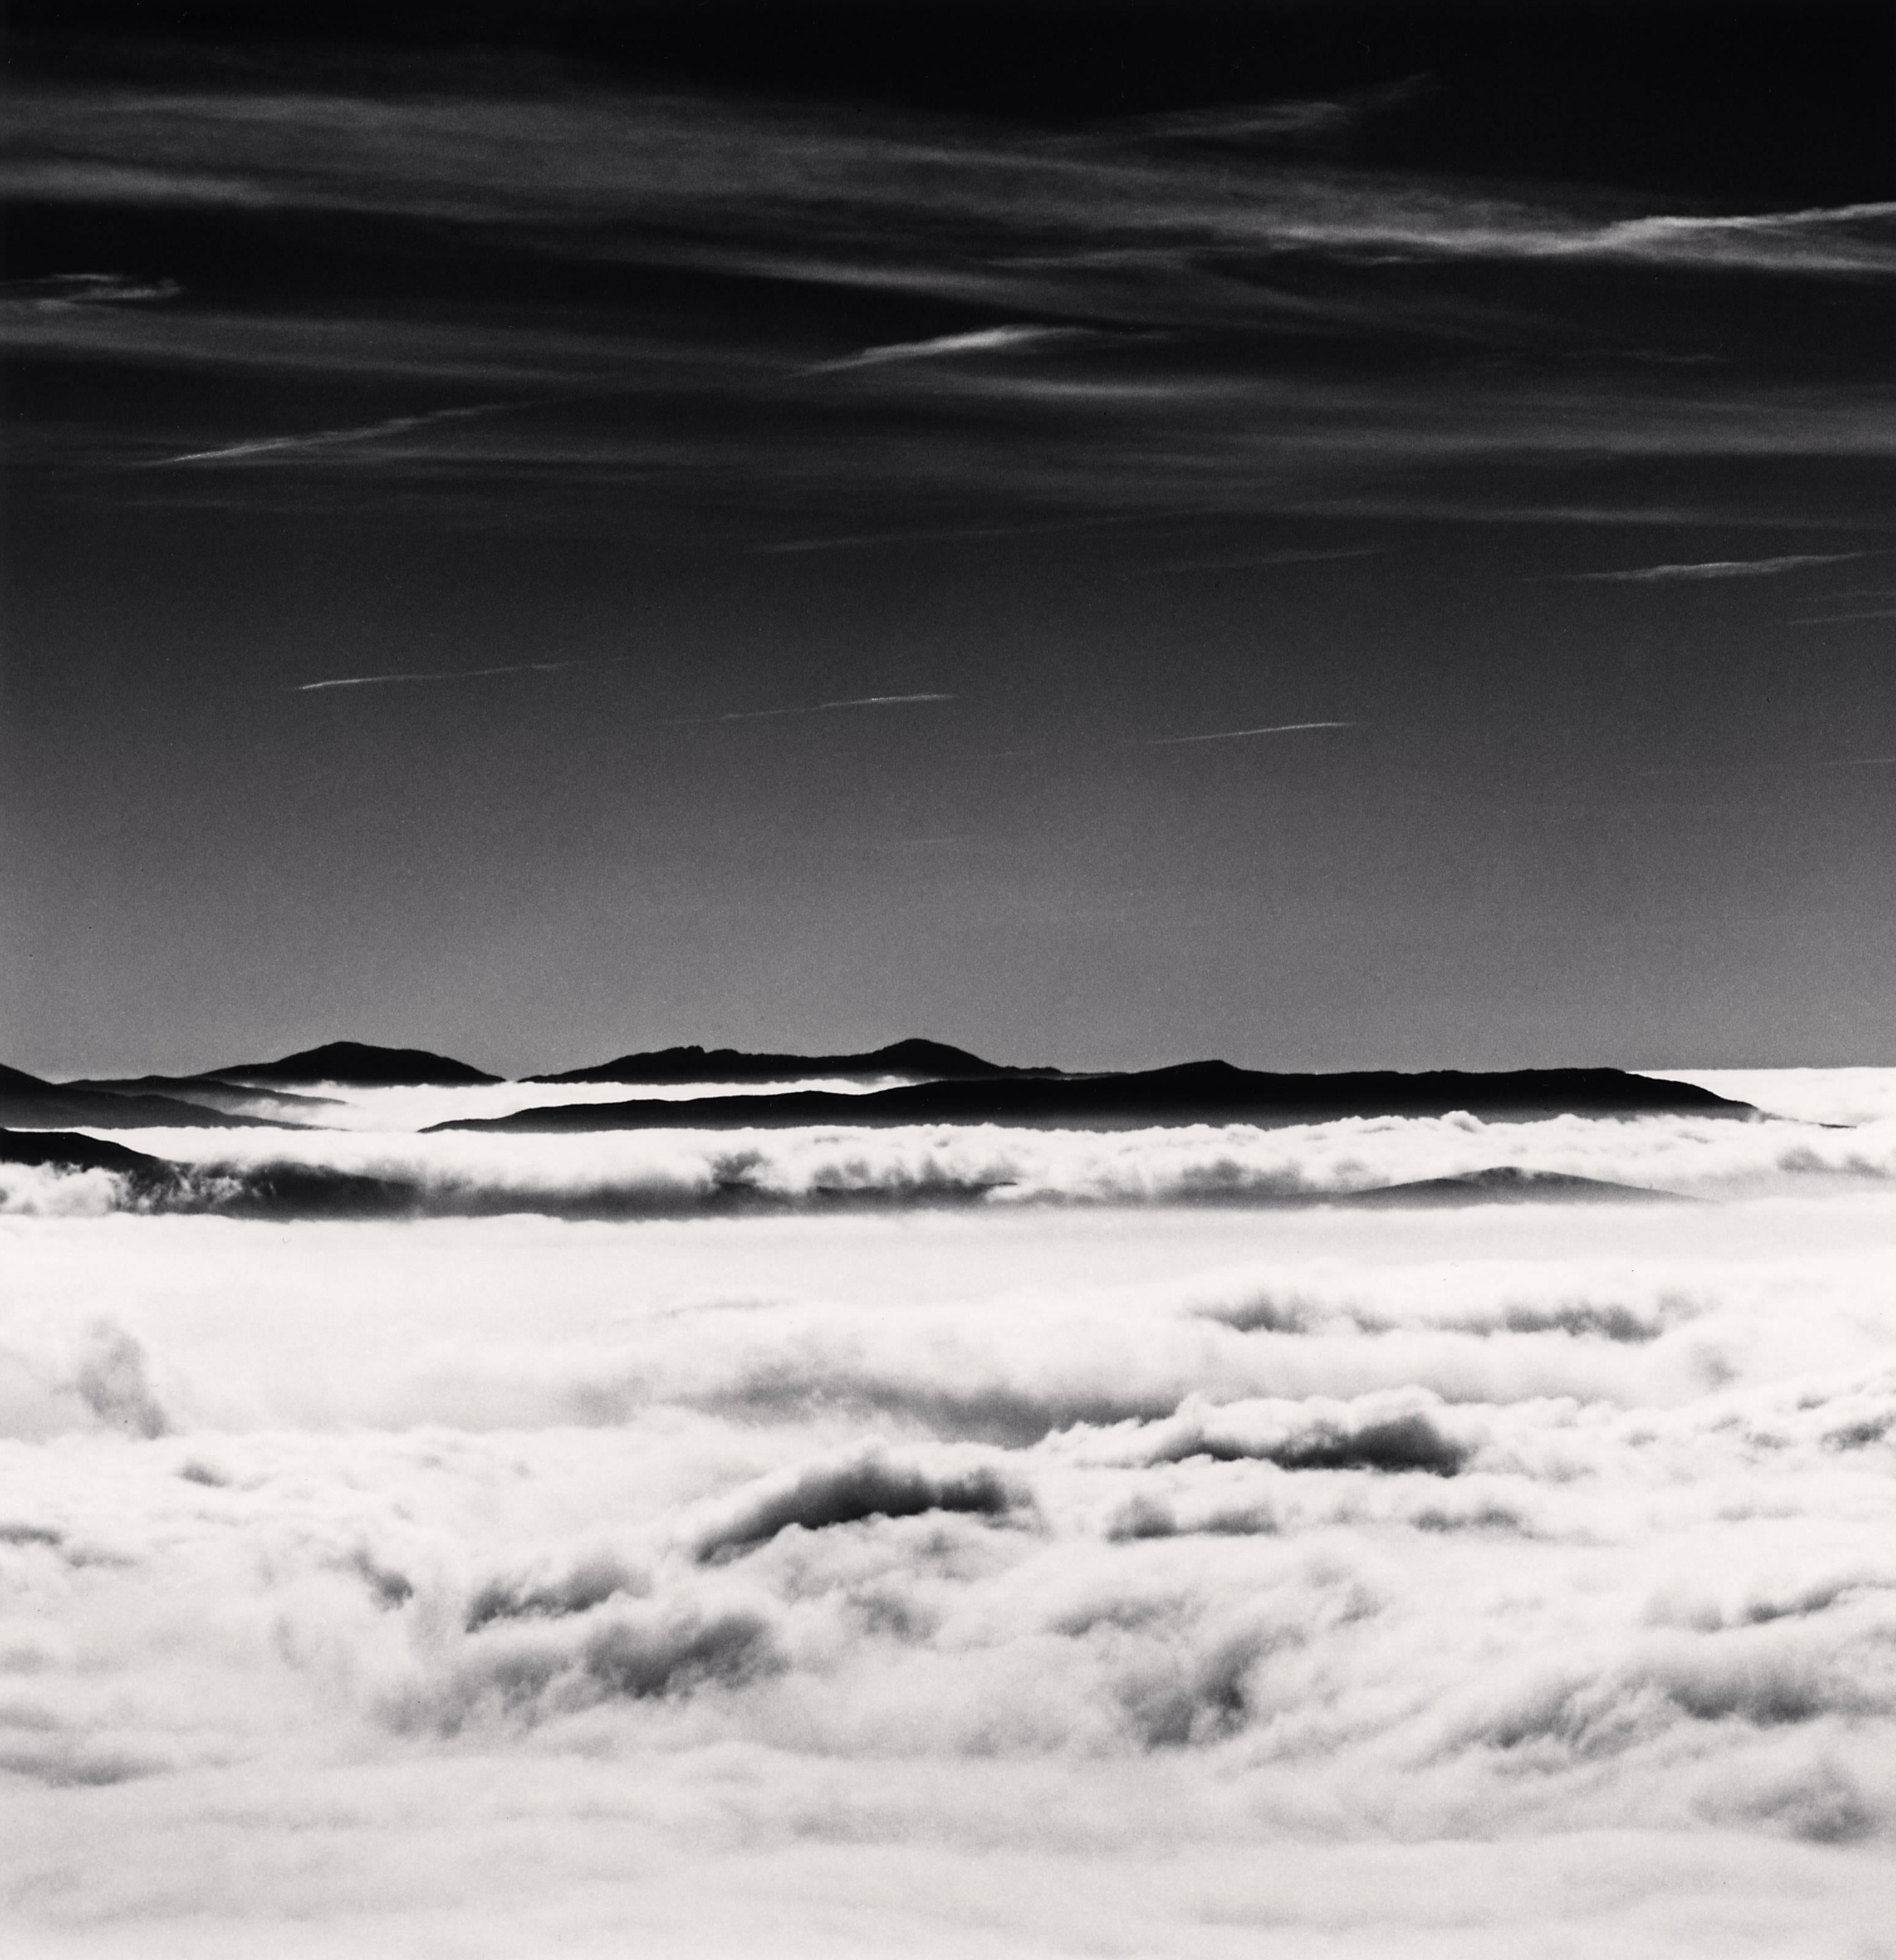 Michael Kenna Black and White Photograph - Above the Clouds, Campo Imperatore, Abruzzo, Italy